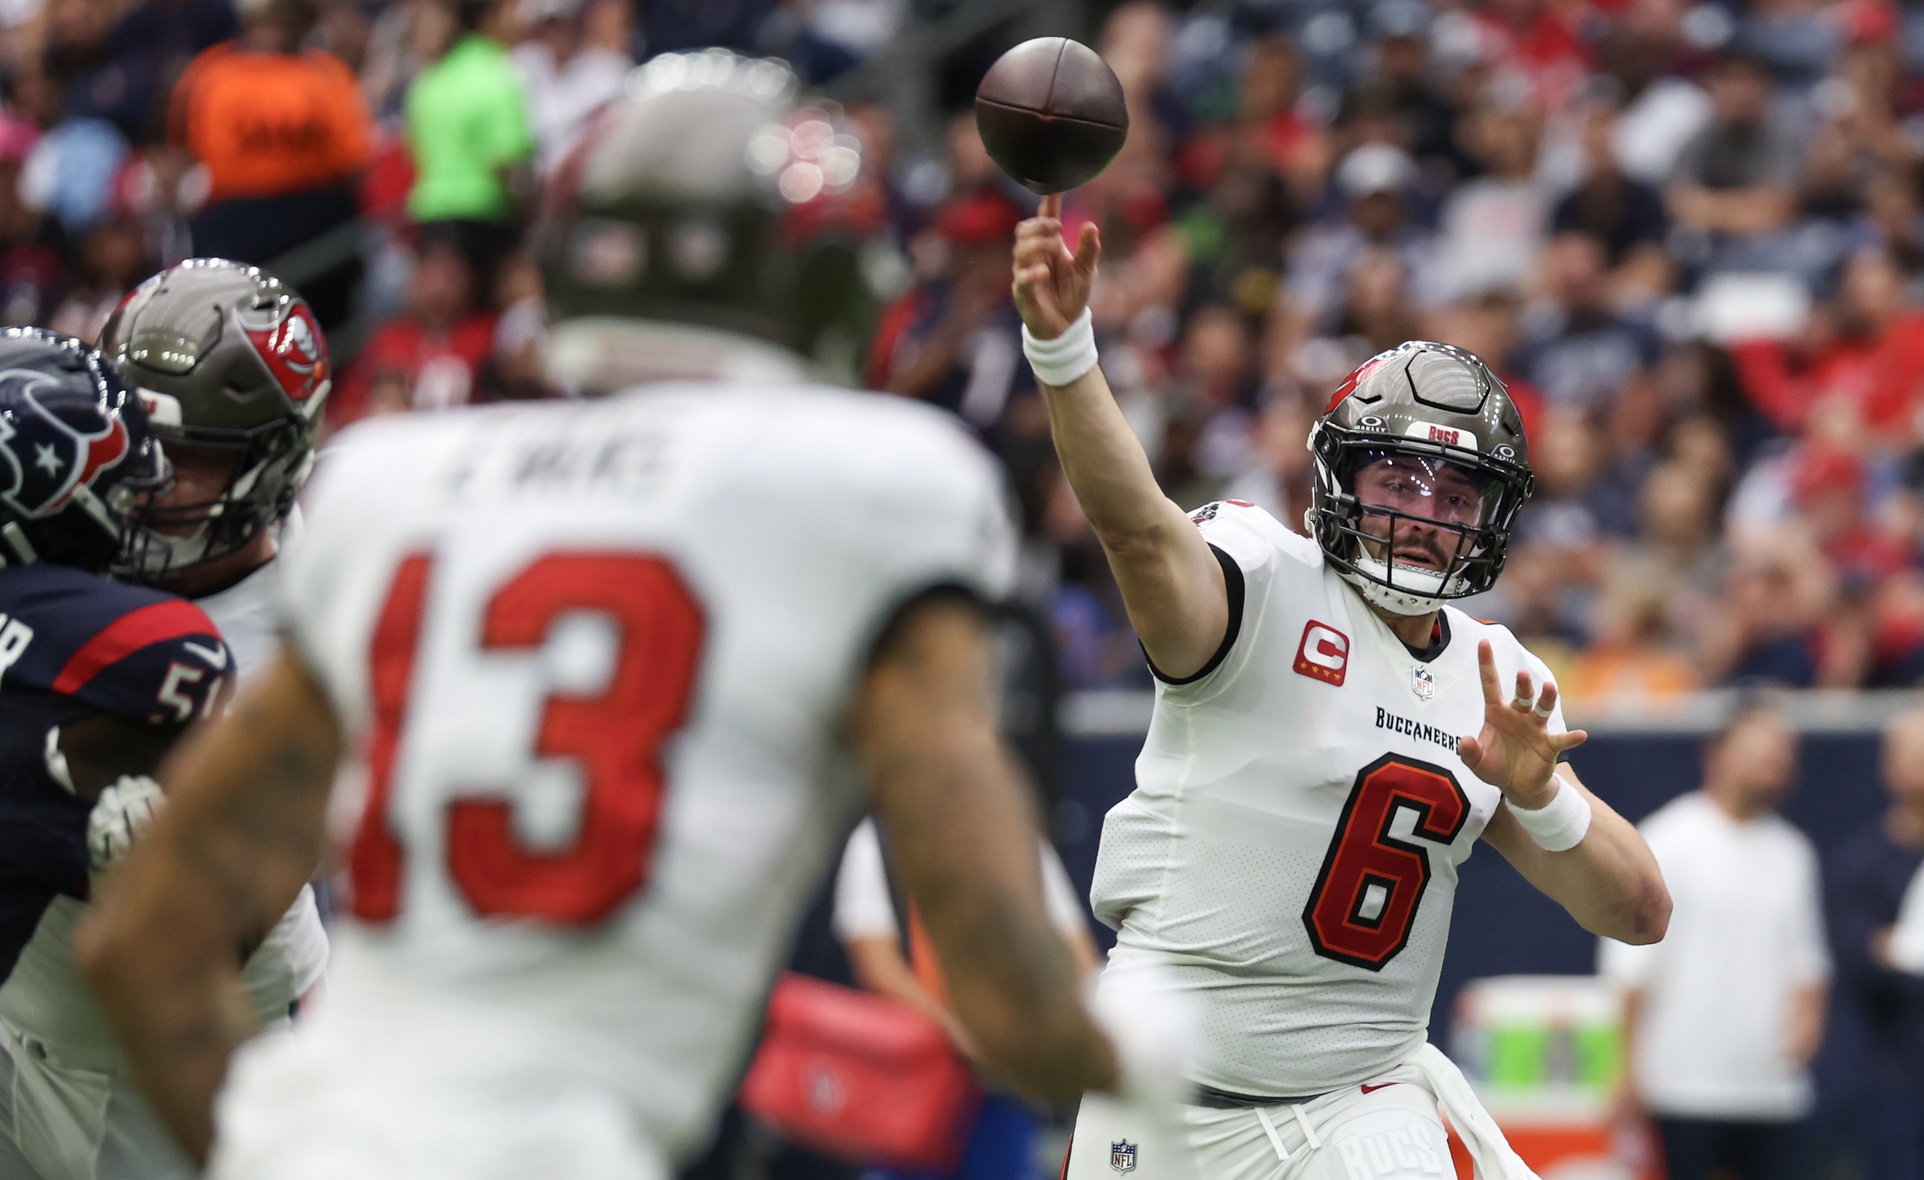 Tampa Bay Buccaneers quarterback Baker Mayfield (6) passes to receiver Mike Evans (13) against the Houston Texans. Mandatory Credit: Thomas Shea-USA TODAY